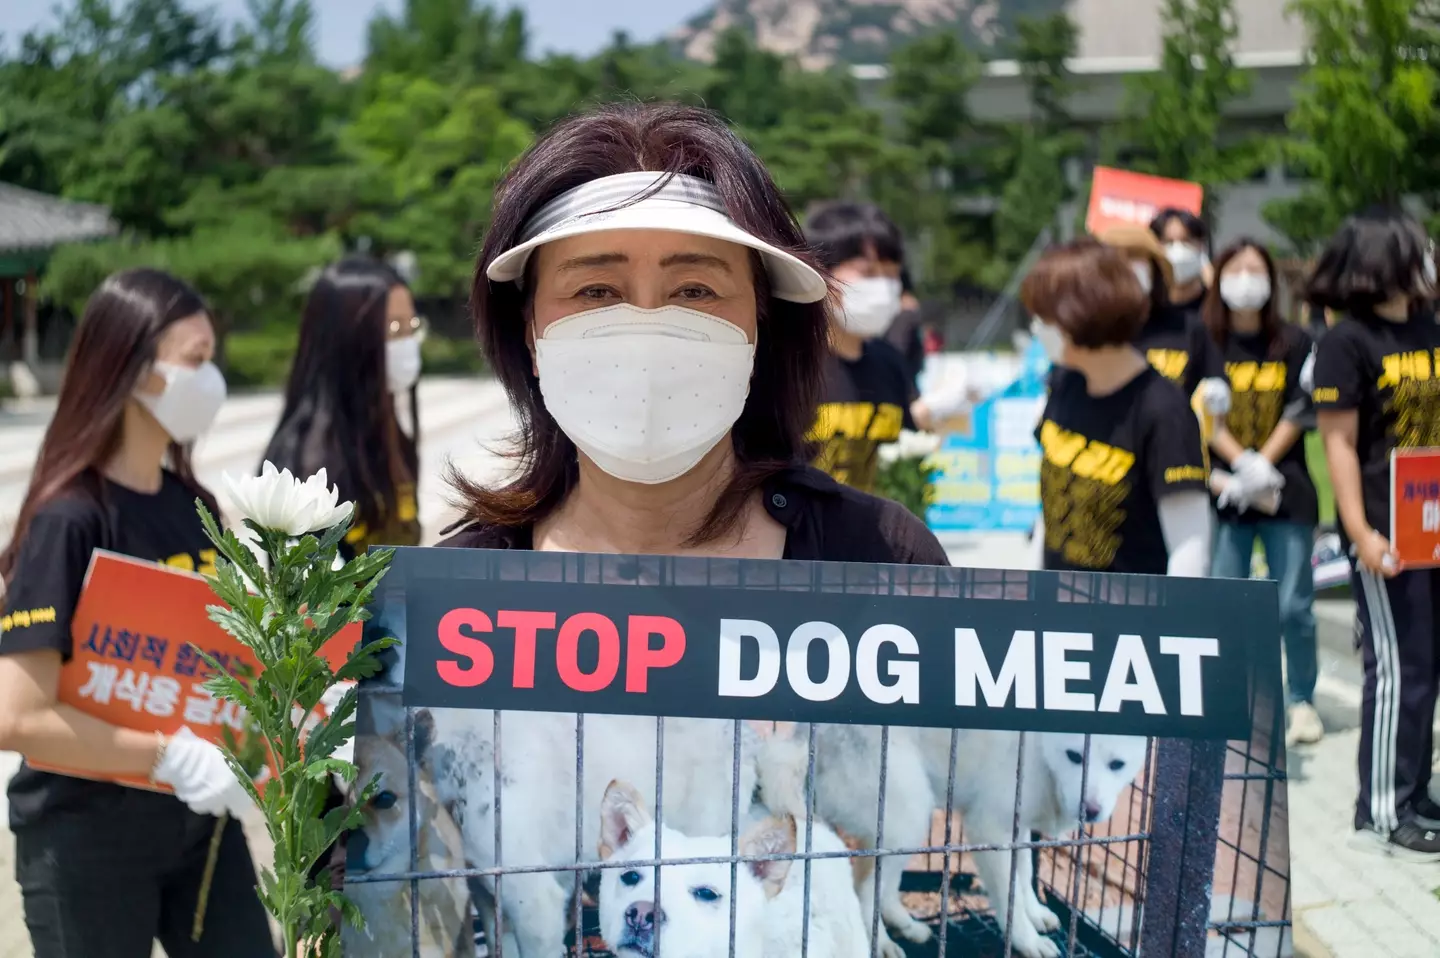 Eating dog meat is becoming less popular as criticism grows.